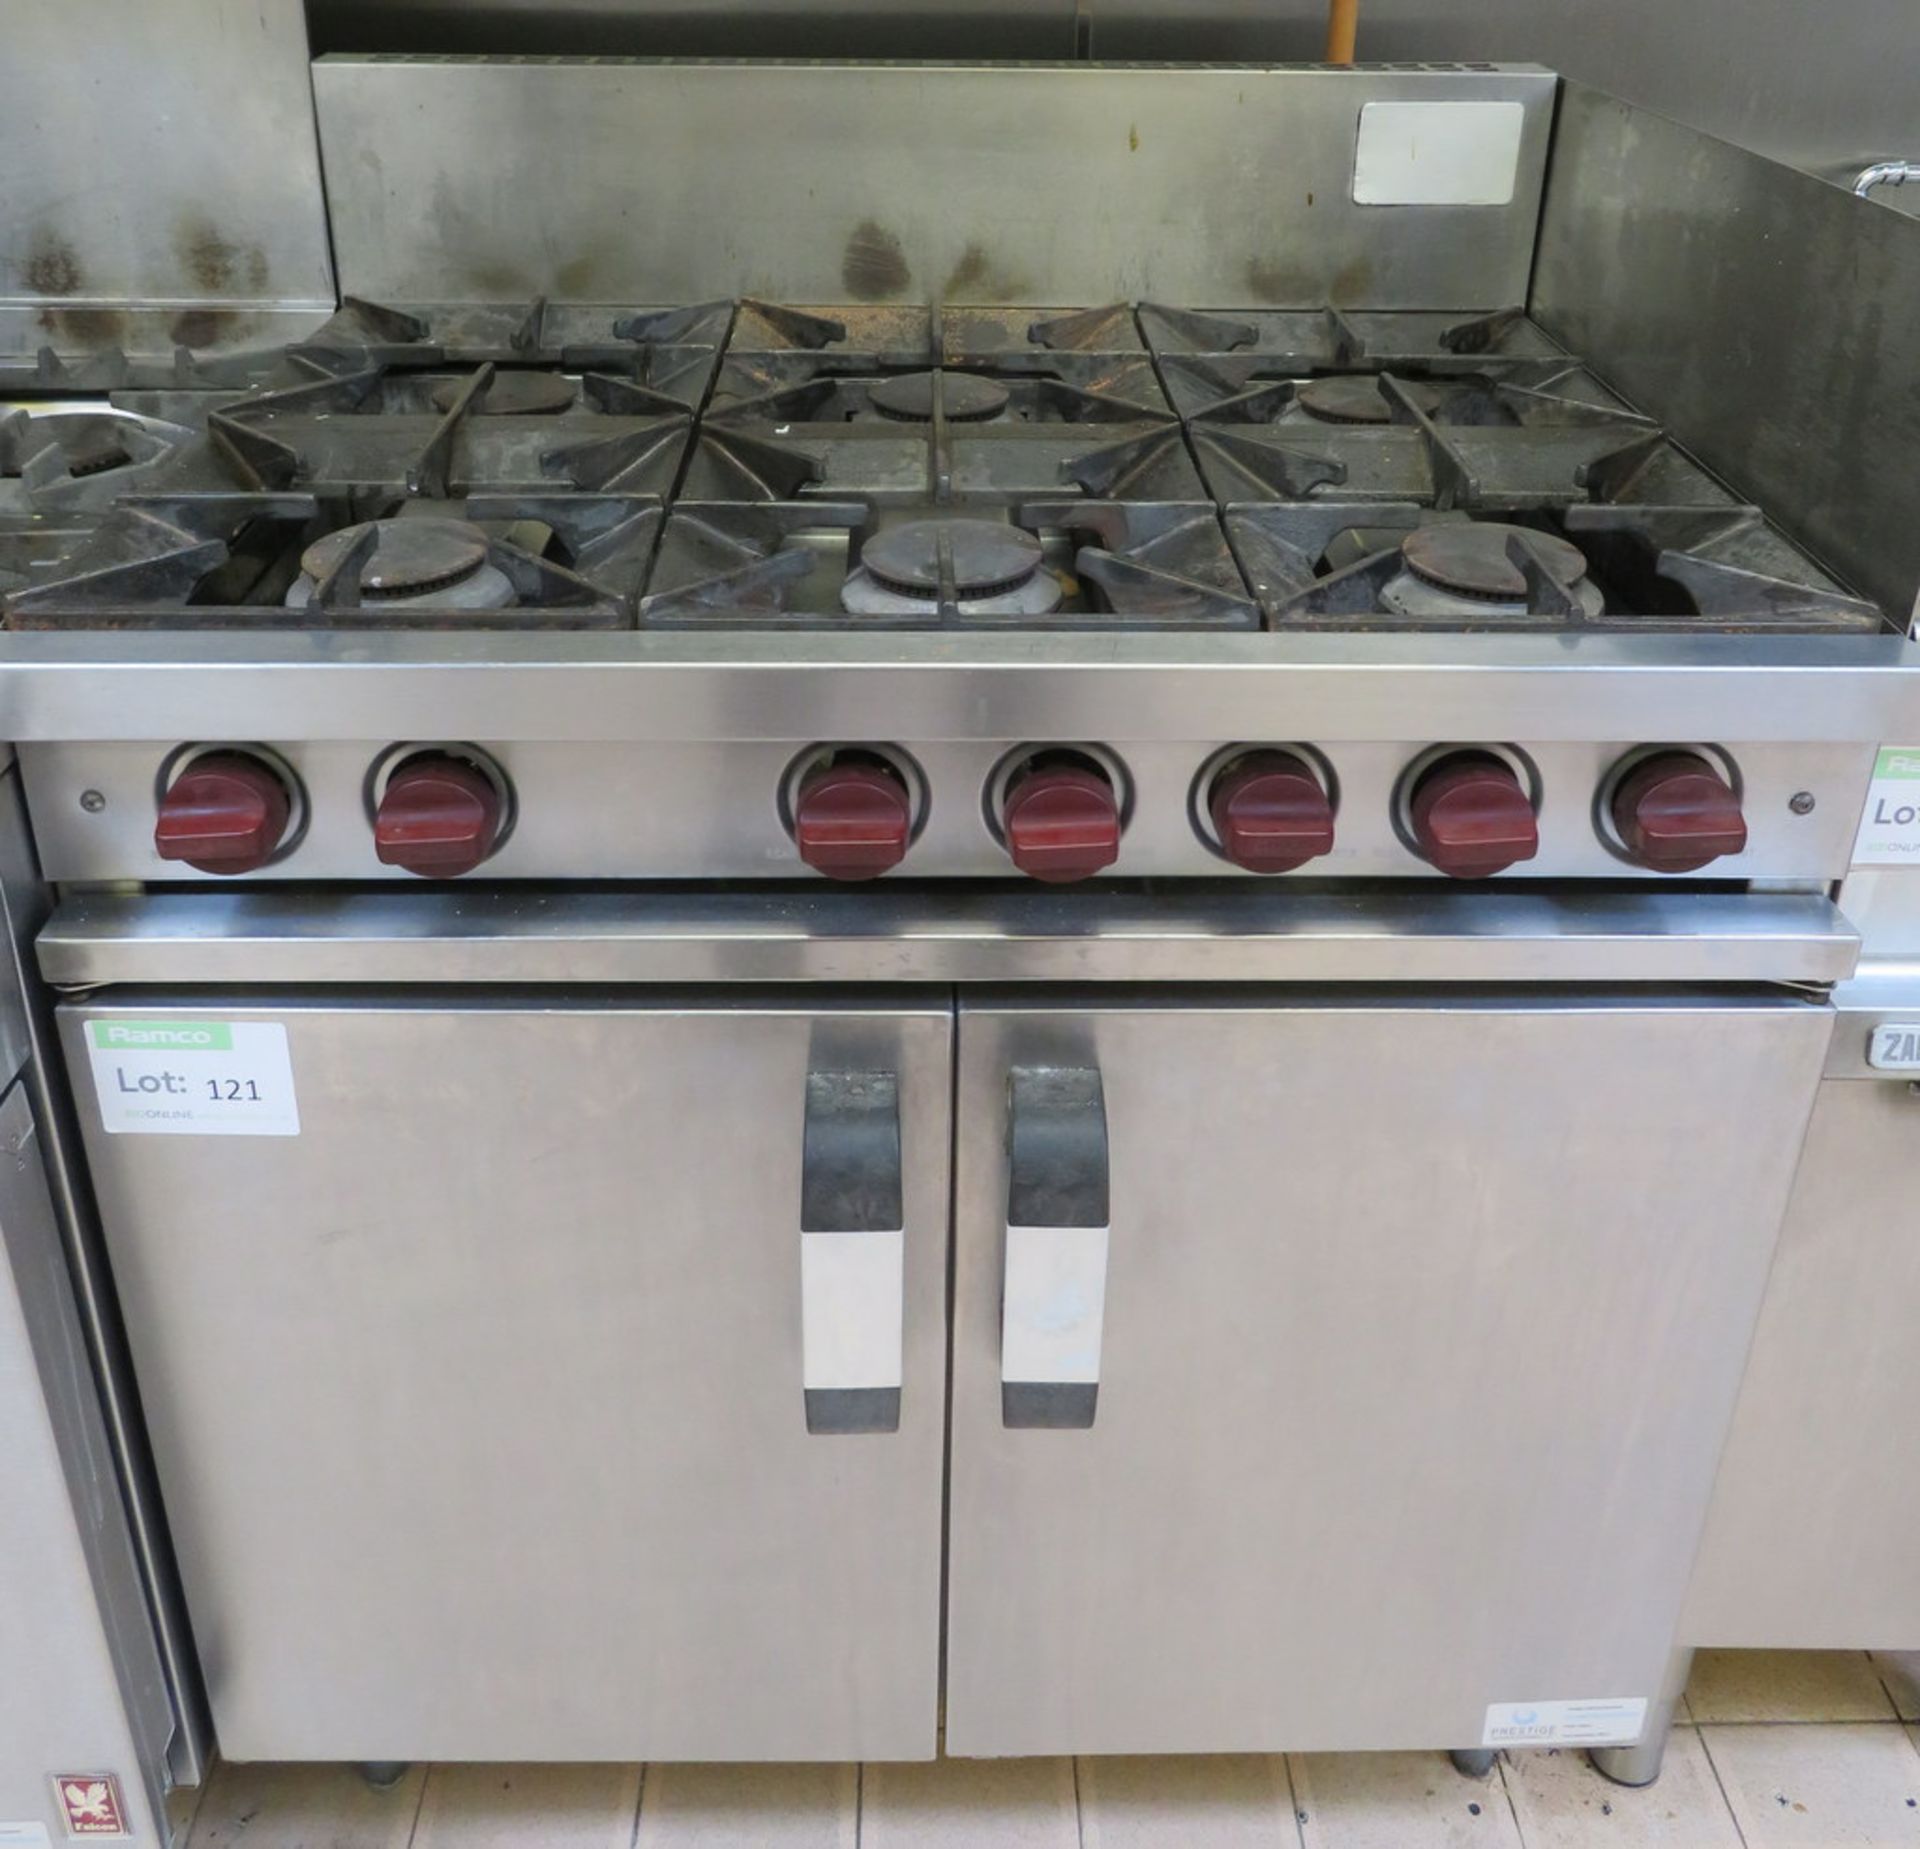 STAINLESS STEEL SIX BURNER GAS HOB AND DOUBLE DOOR OVEN